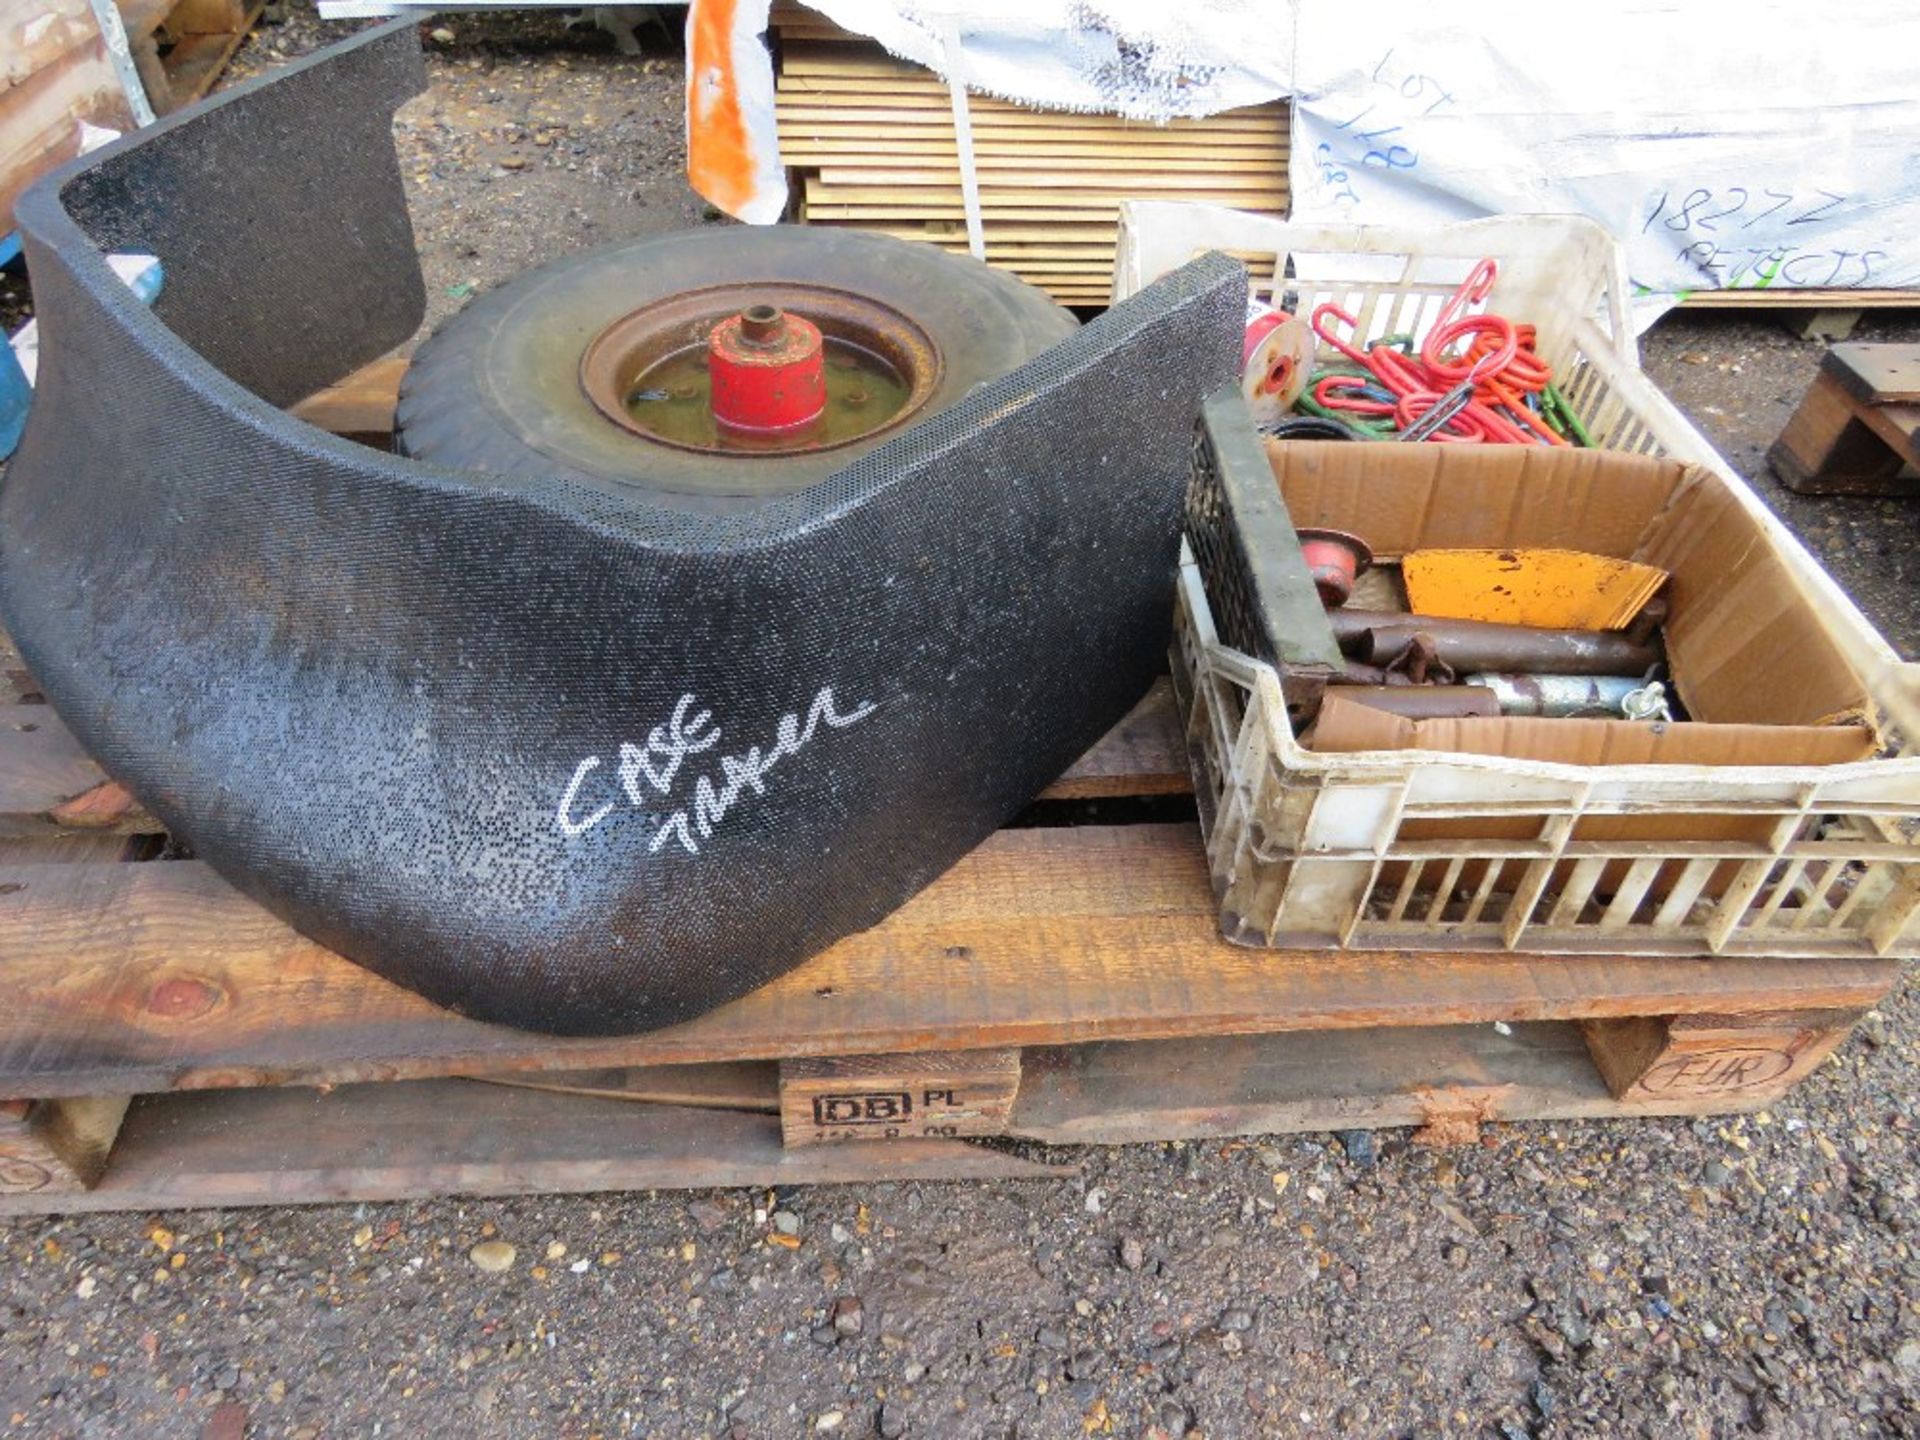 CASE TRACTOR PARTS PLUS HAY TURNER TINES ETC. THIS LOT IS SOLD UNDER THE AUCTIONEERS MARGIN SCHEM - Image 3 of 3